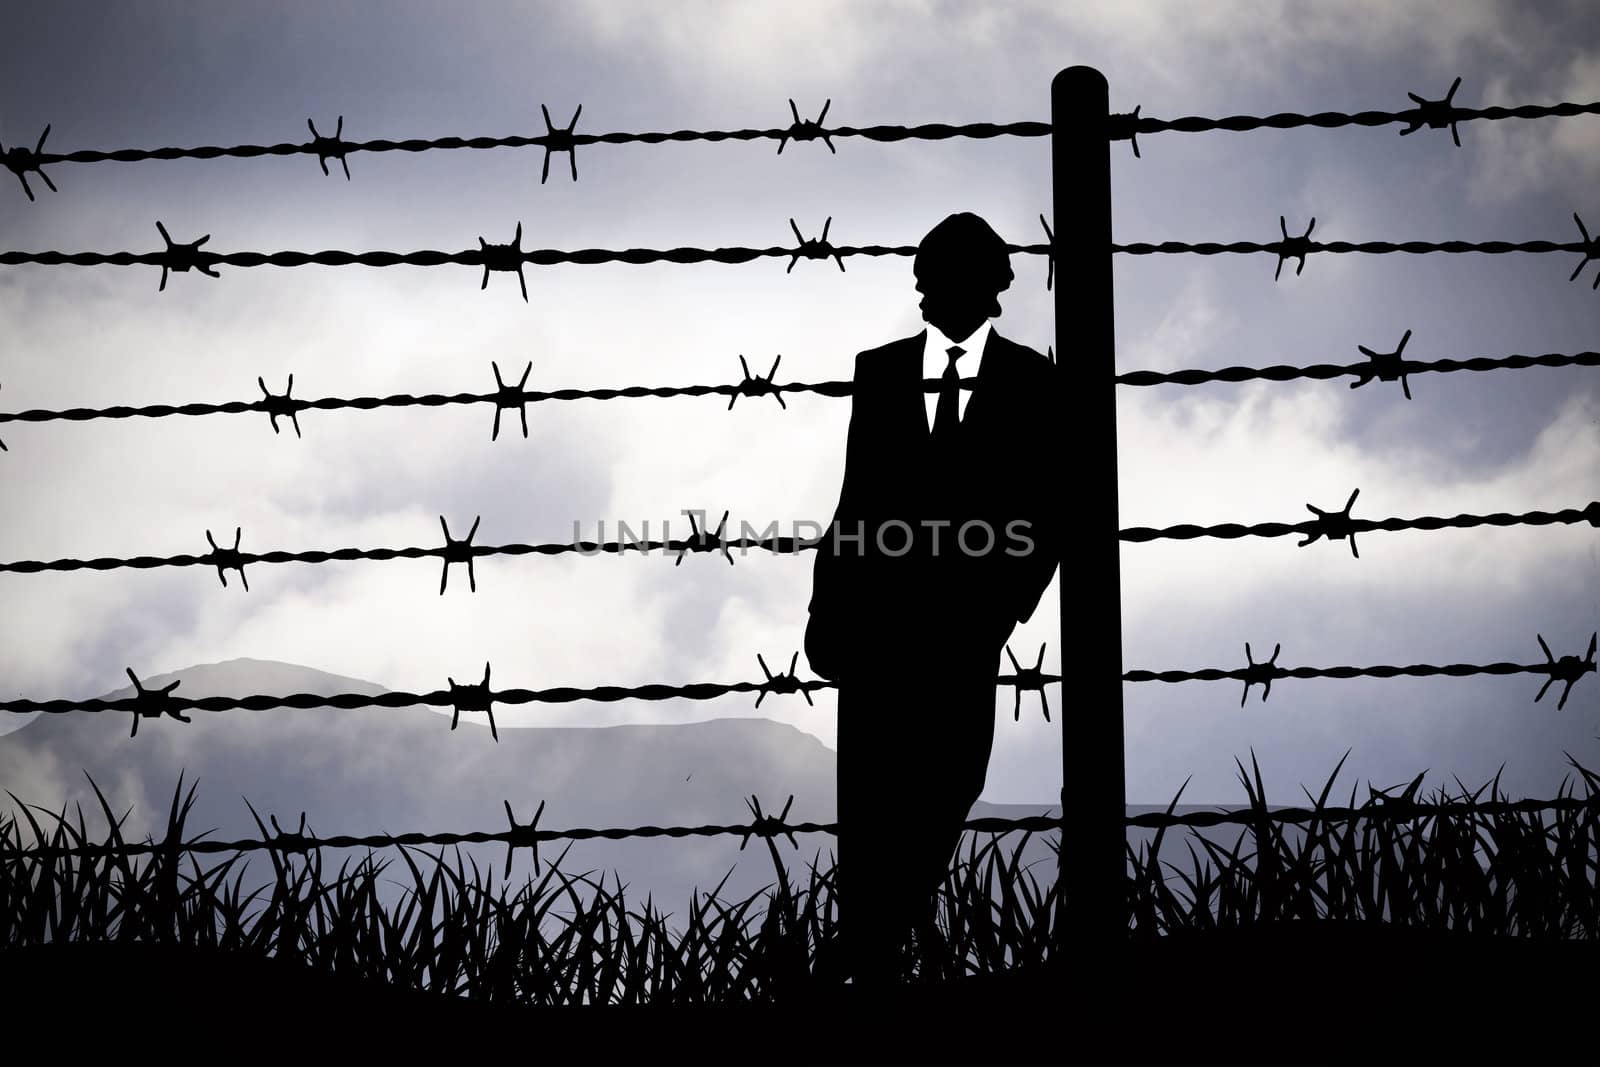 Manager behind Barbed wire by Hasenonkel